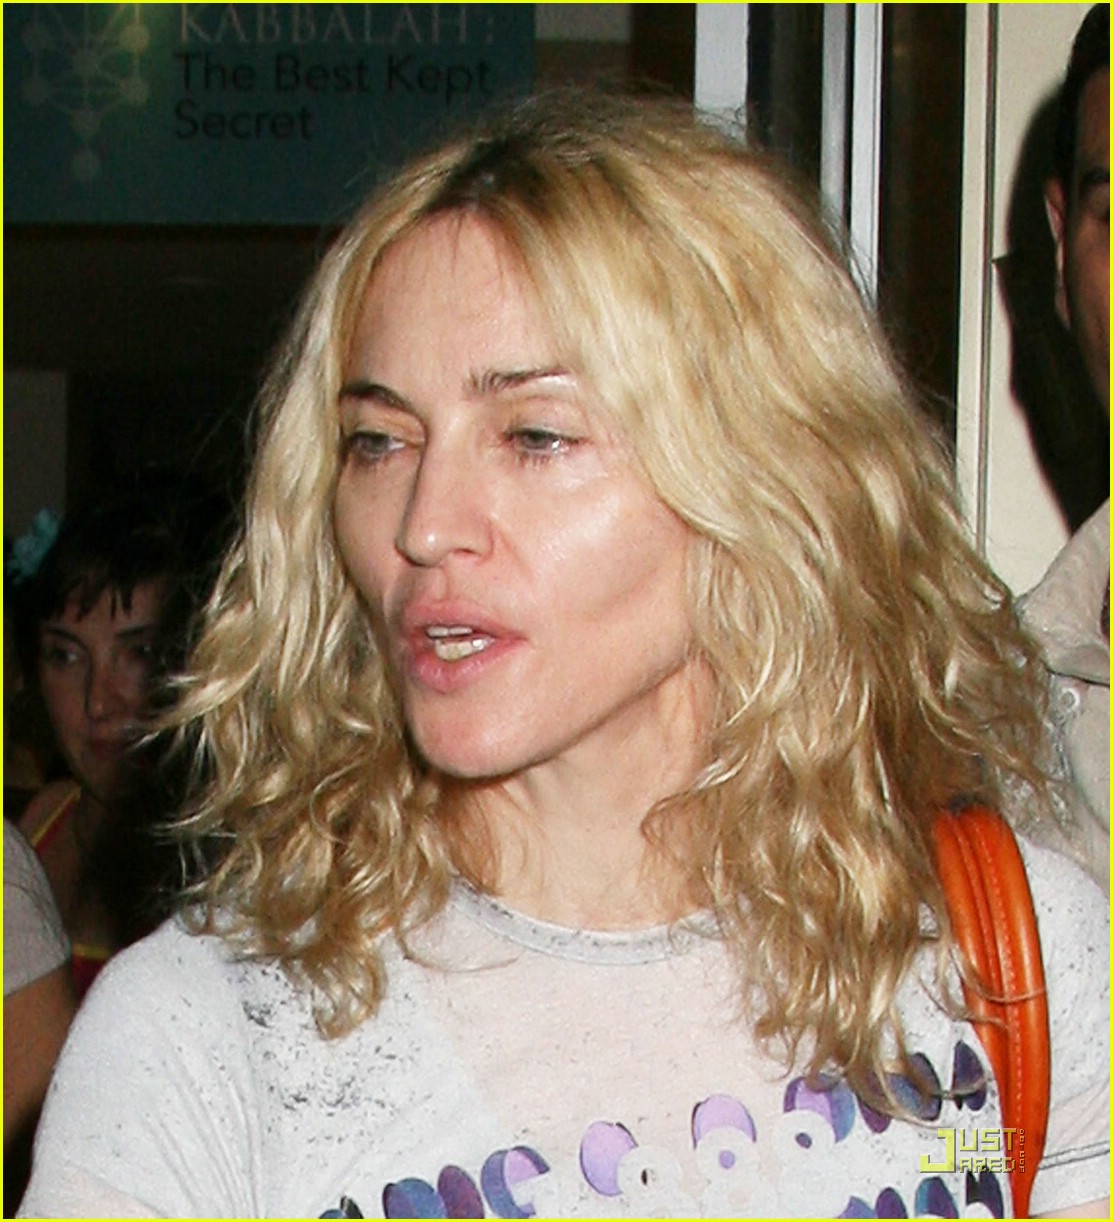 Madonna not looking so hot